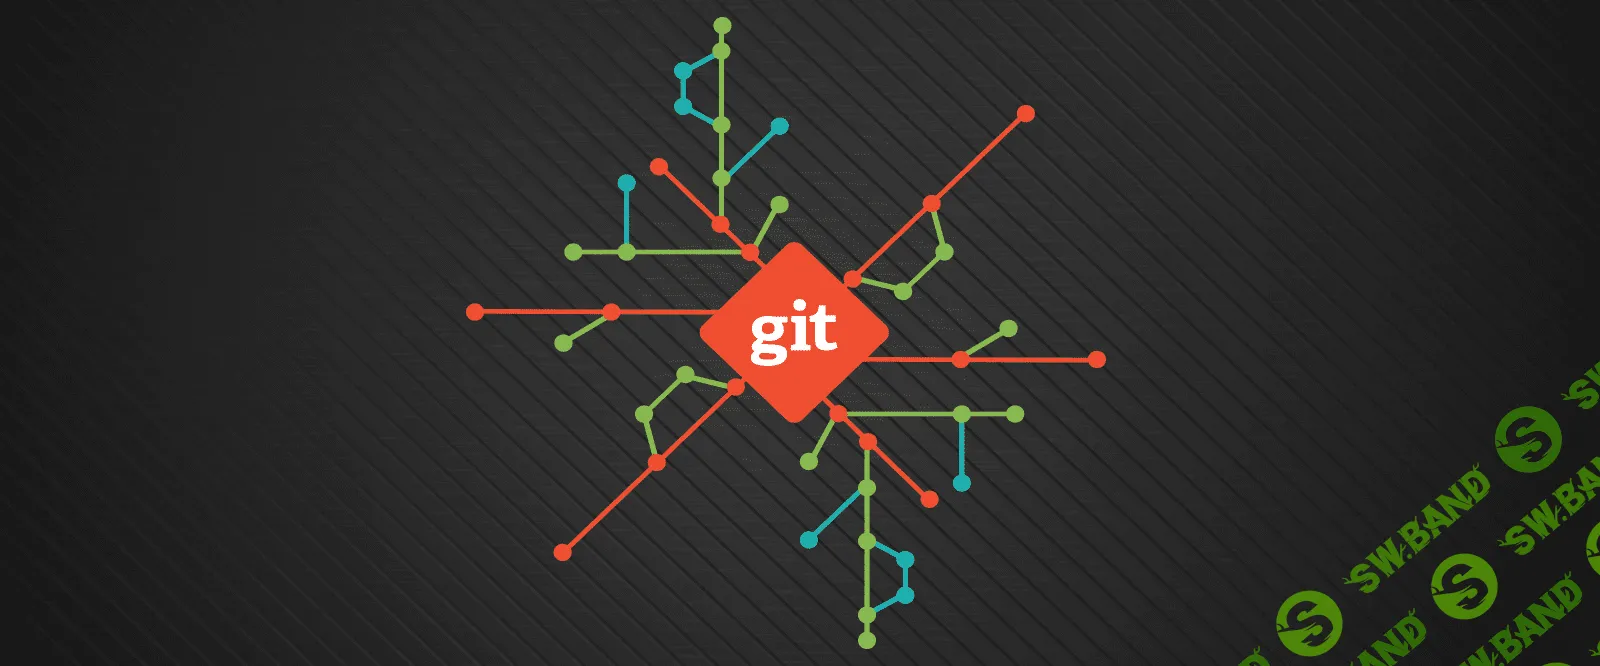 [Udemy] Console Git - Practical Guide (2019)